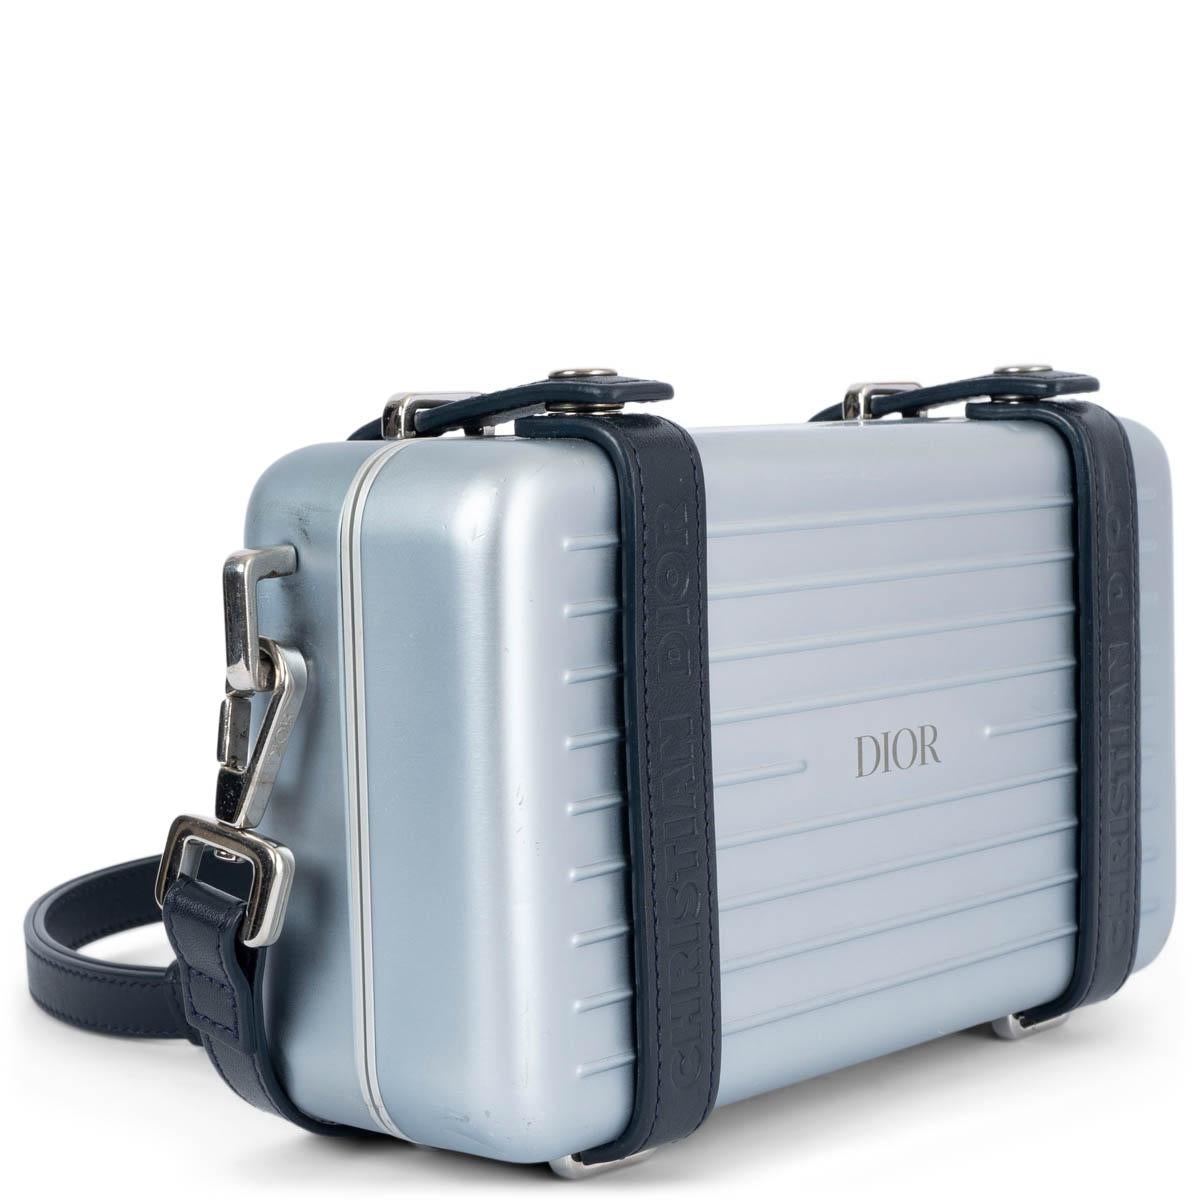 100% authentic Christian Dior x Rimowa 2022 Personal Clutch in metallic blue lightweight yet durable aluminum with dark blue leather trim and interior. Opens with push buttons to a interior divided in three compartment with one zipper pocket and six